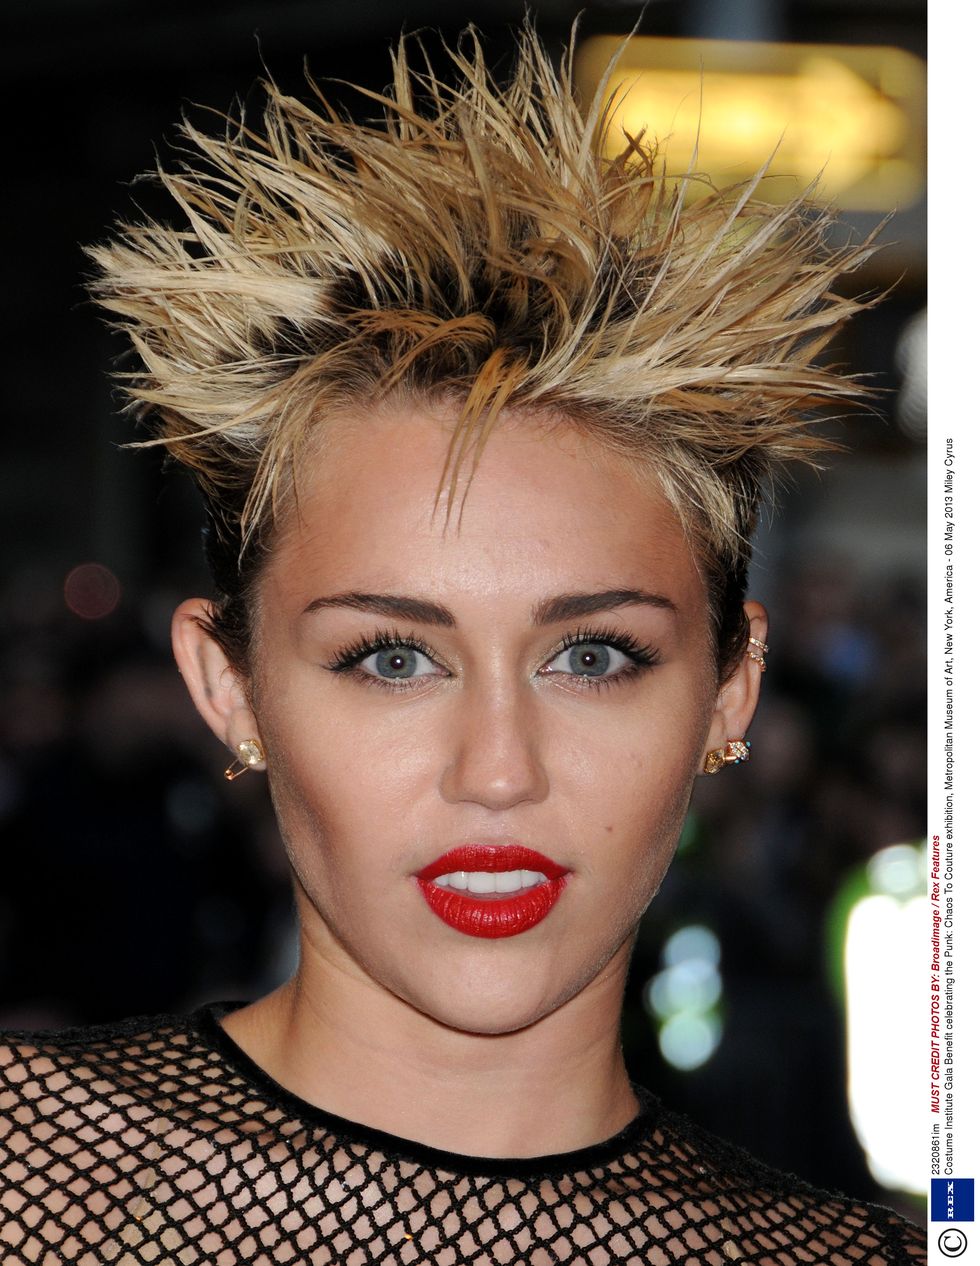 Miley Cyrus shows off spiky hair